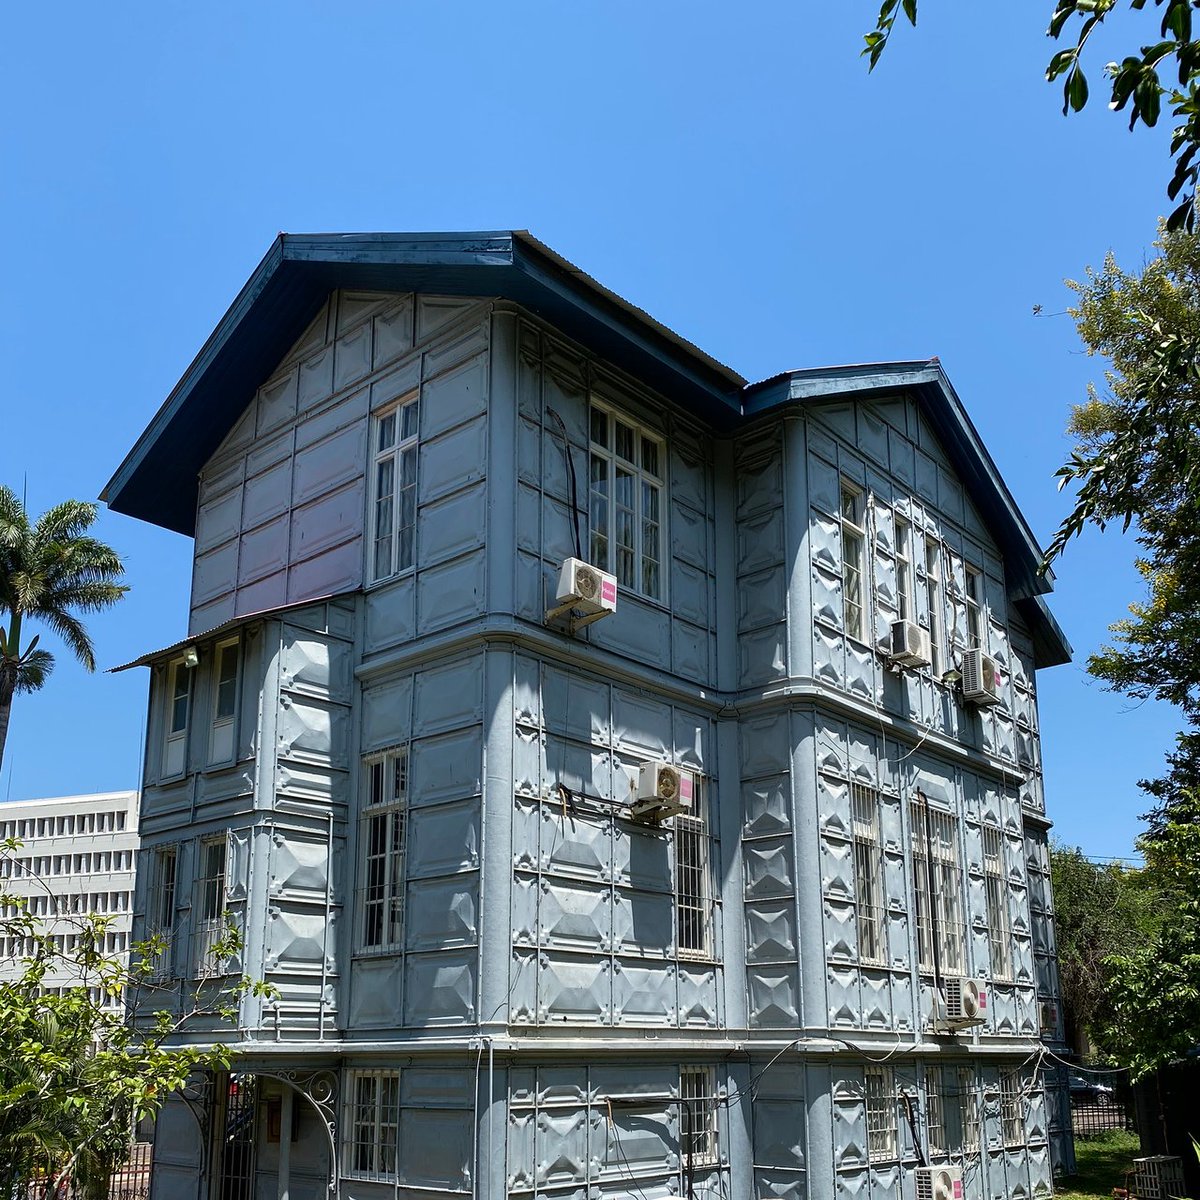 Our next site in Mozambique is Casa de Ferro (The Iron House). It's a prefabricated house that was imported from Belgium in 1892 and was supposed to be the home of the governor-general, but wasn't habitable as it was too hot in the heat of summer. It's one of two buildings in....